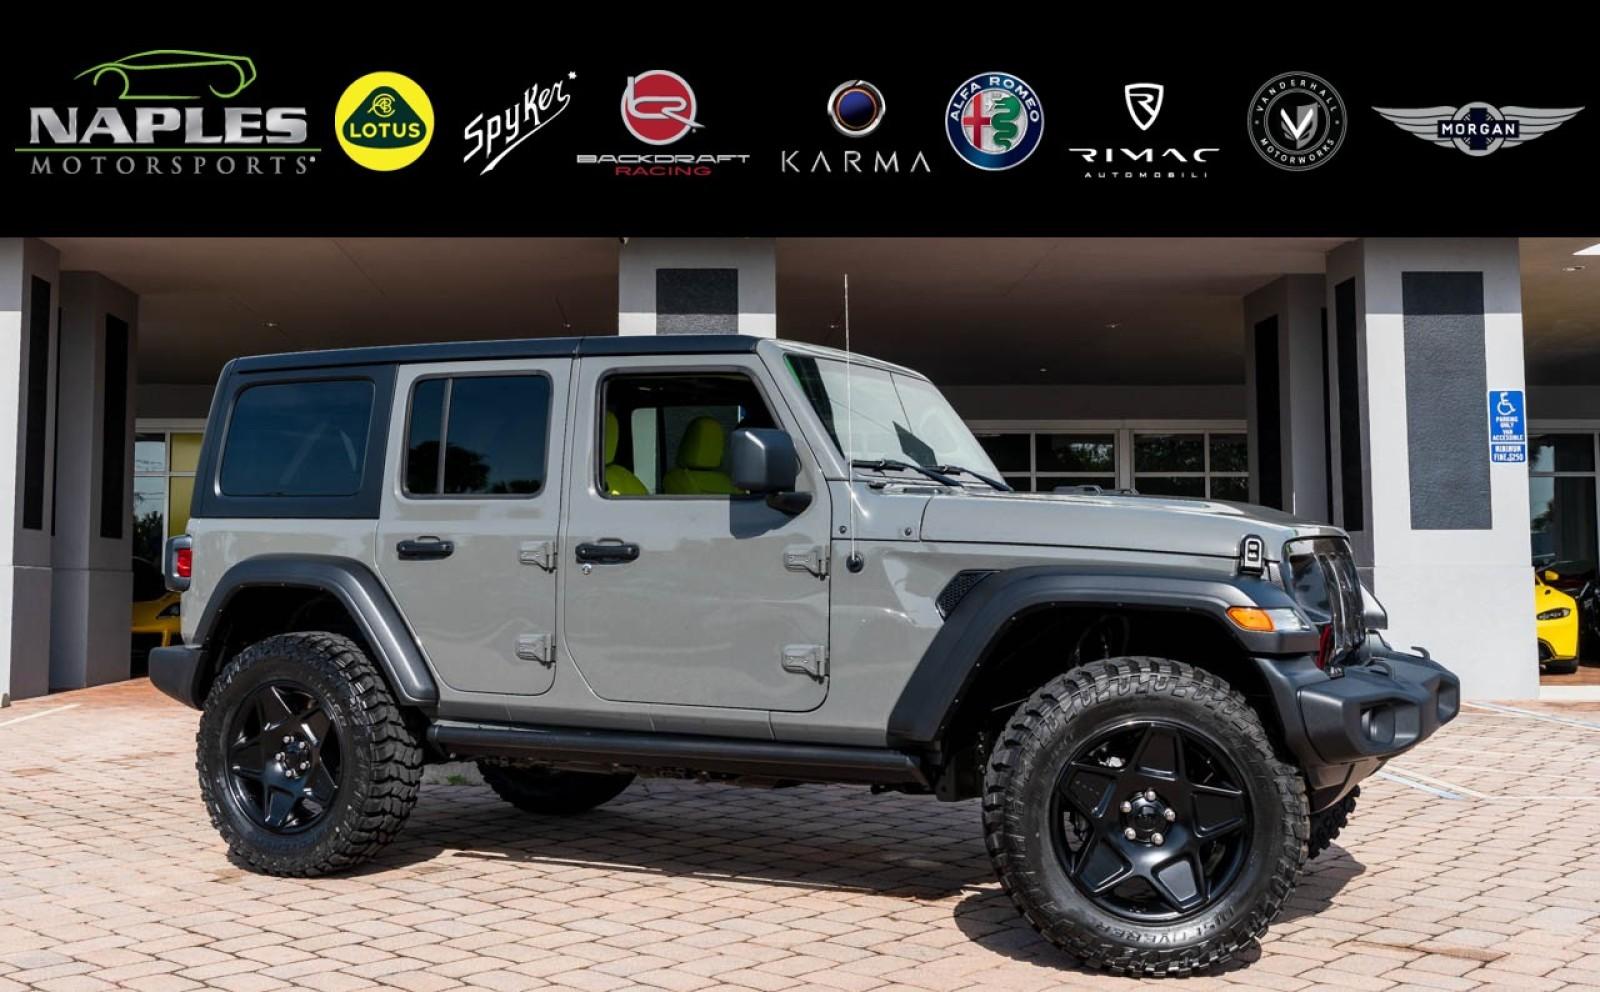 Used 2022 Jeep Wrangler Unlimited Sport S For Sale (Sold) Naples  Motorsports Inc Stock #22-232587